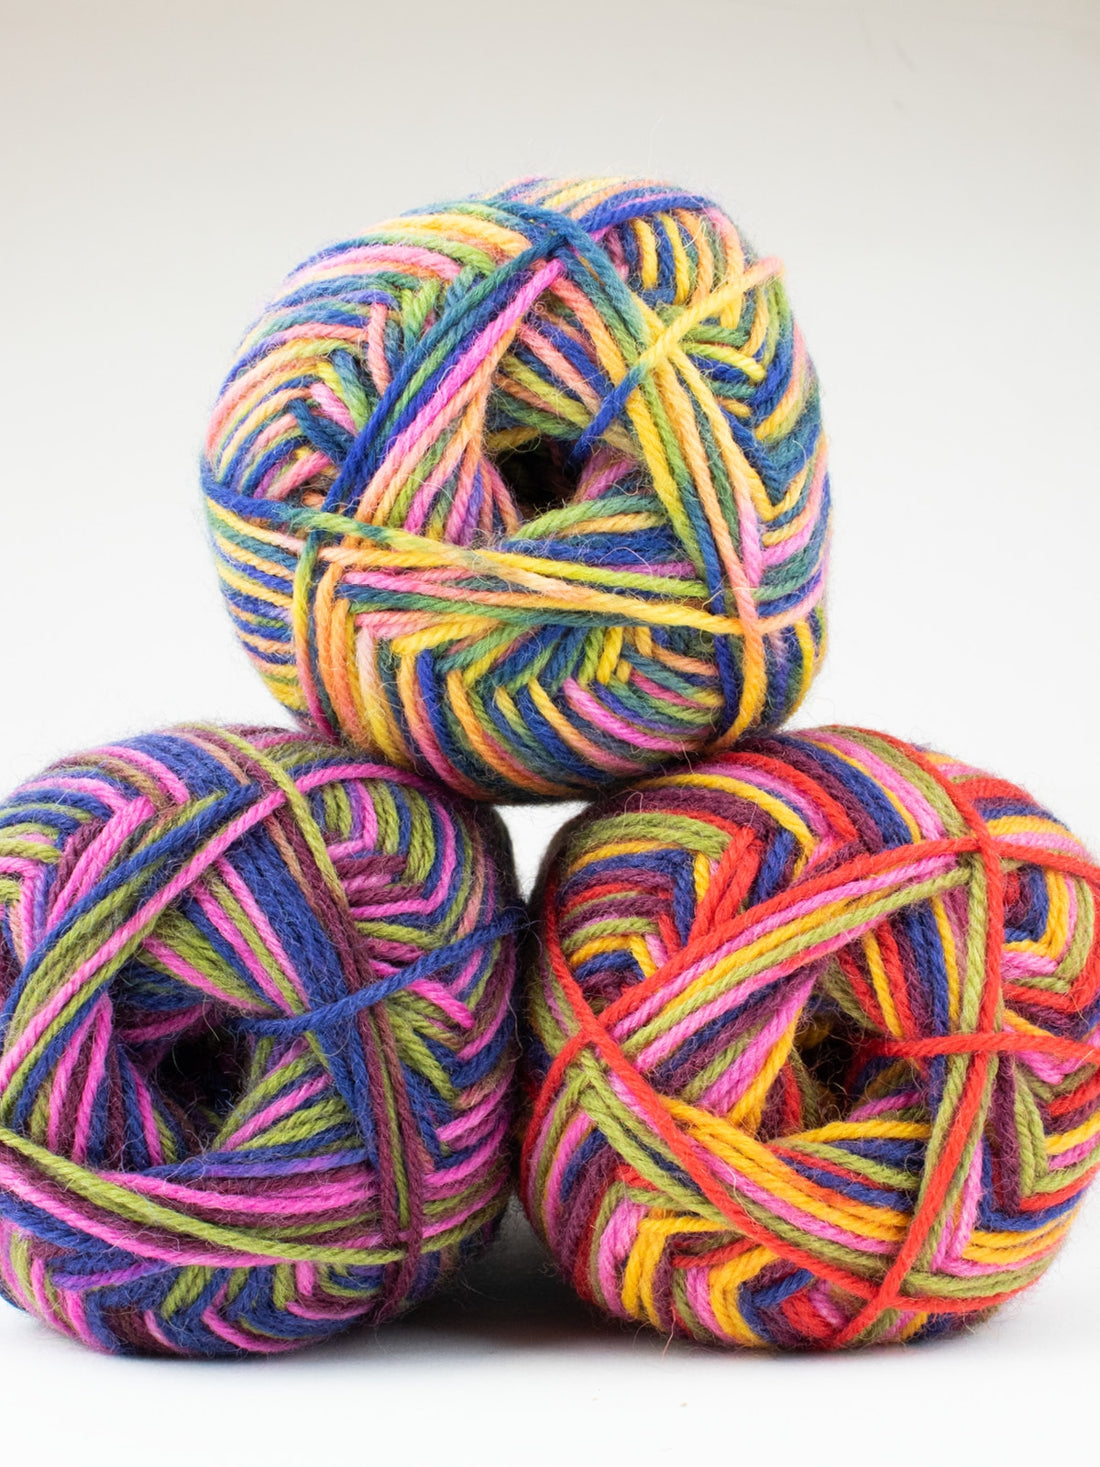 West Yorkshire Spinners Signature 4ply – Zandra Rhodes